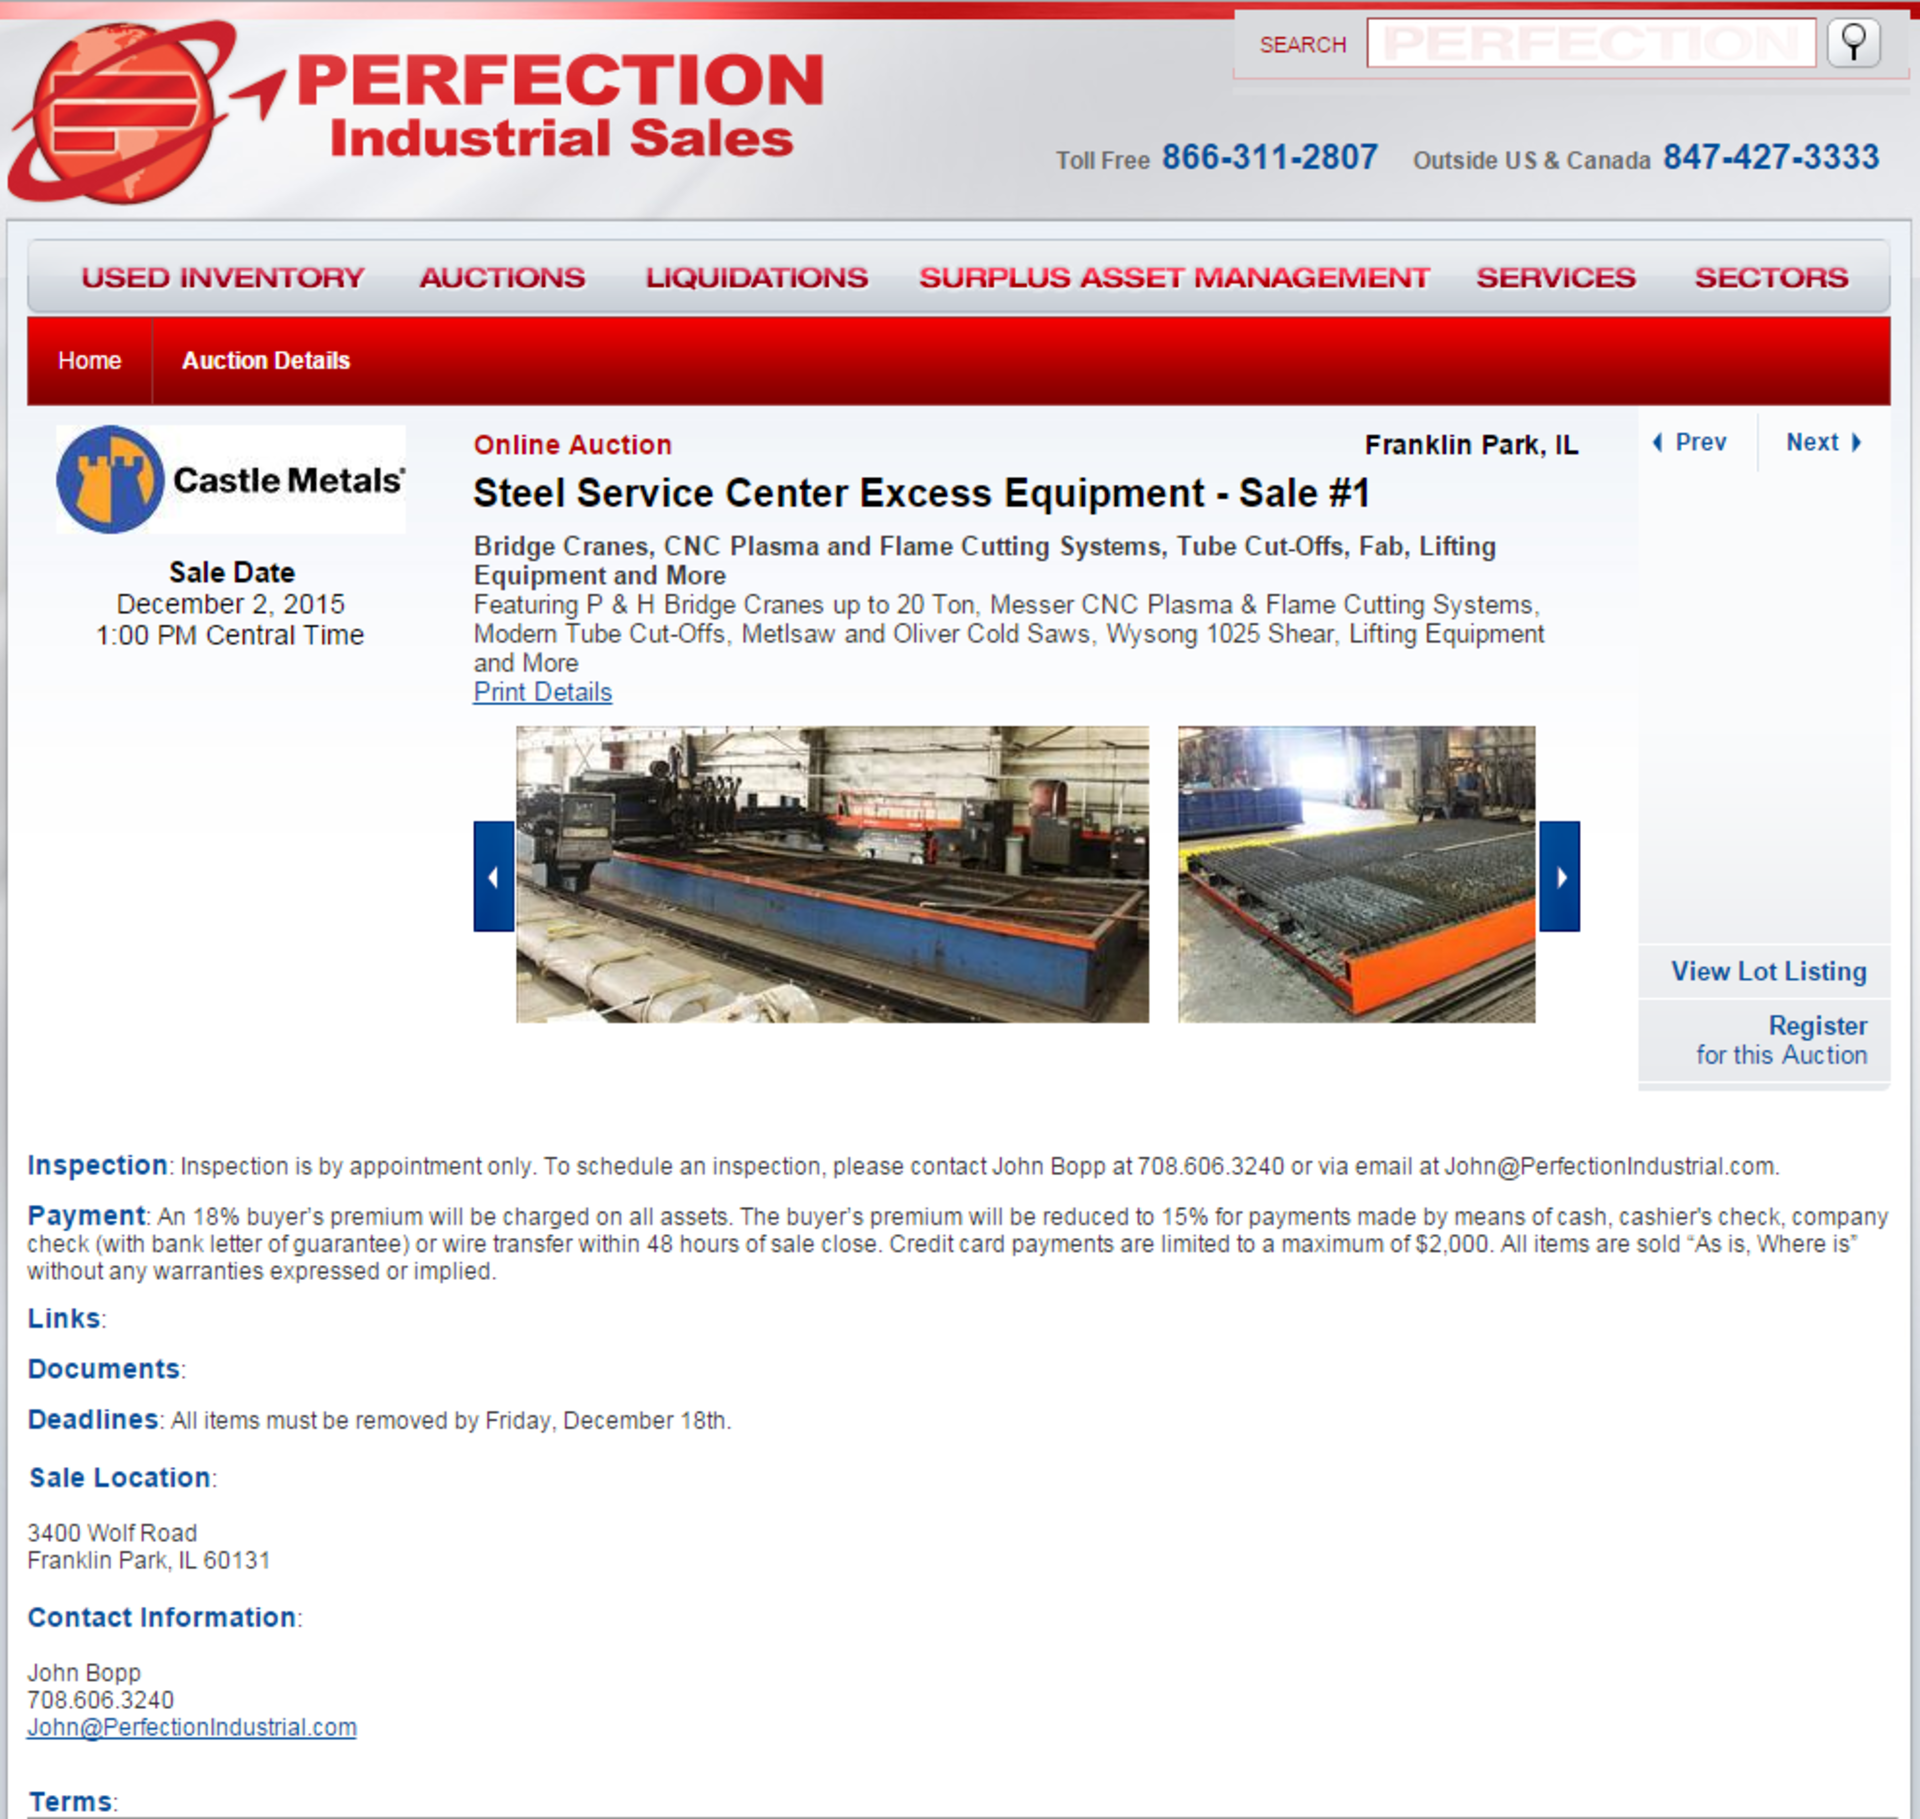 This auction is being conducted by Perfection Industrial Sales